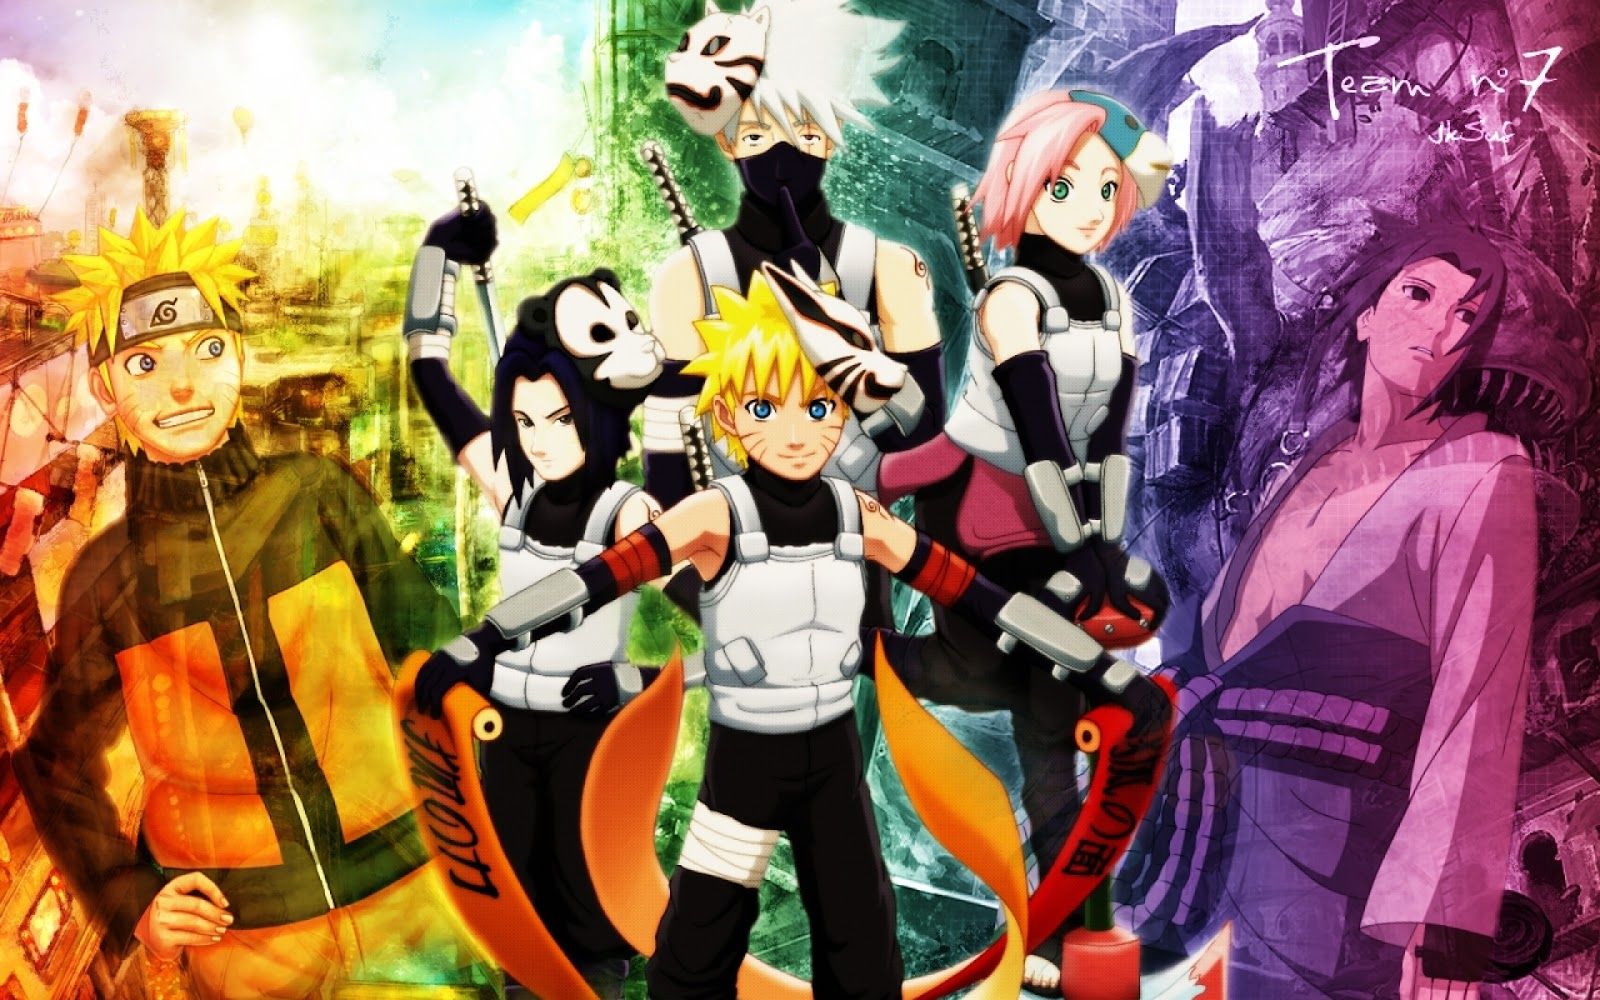 15 Naruto Team 7 Wallpapers for iPhone and Android by Michael Green